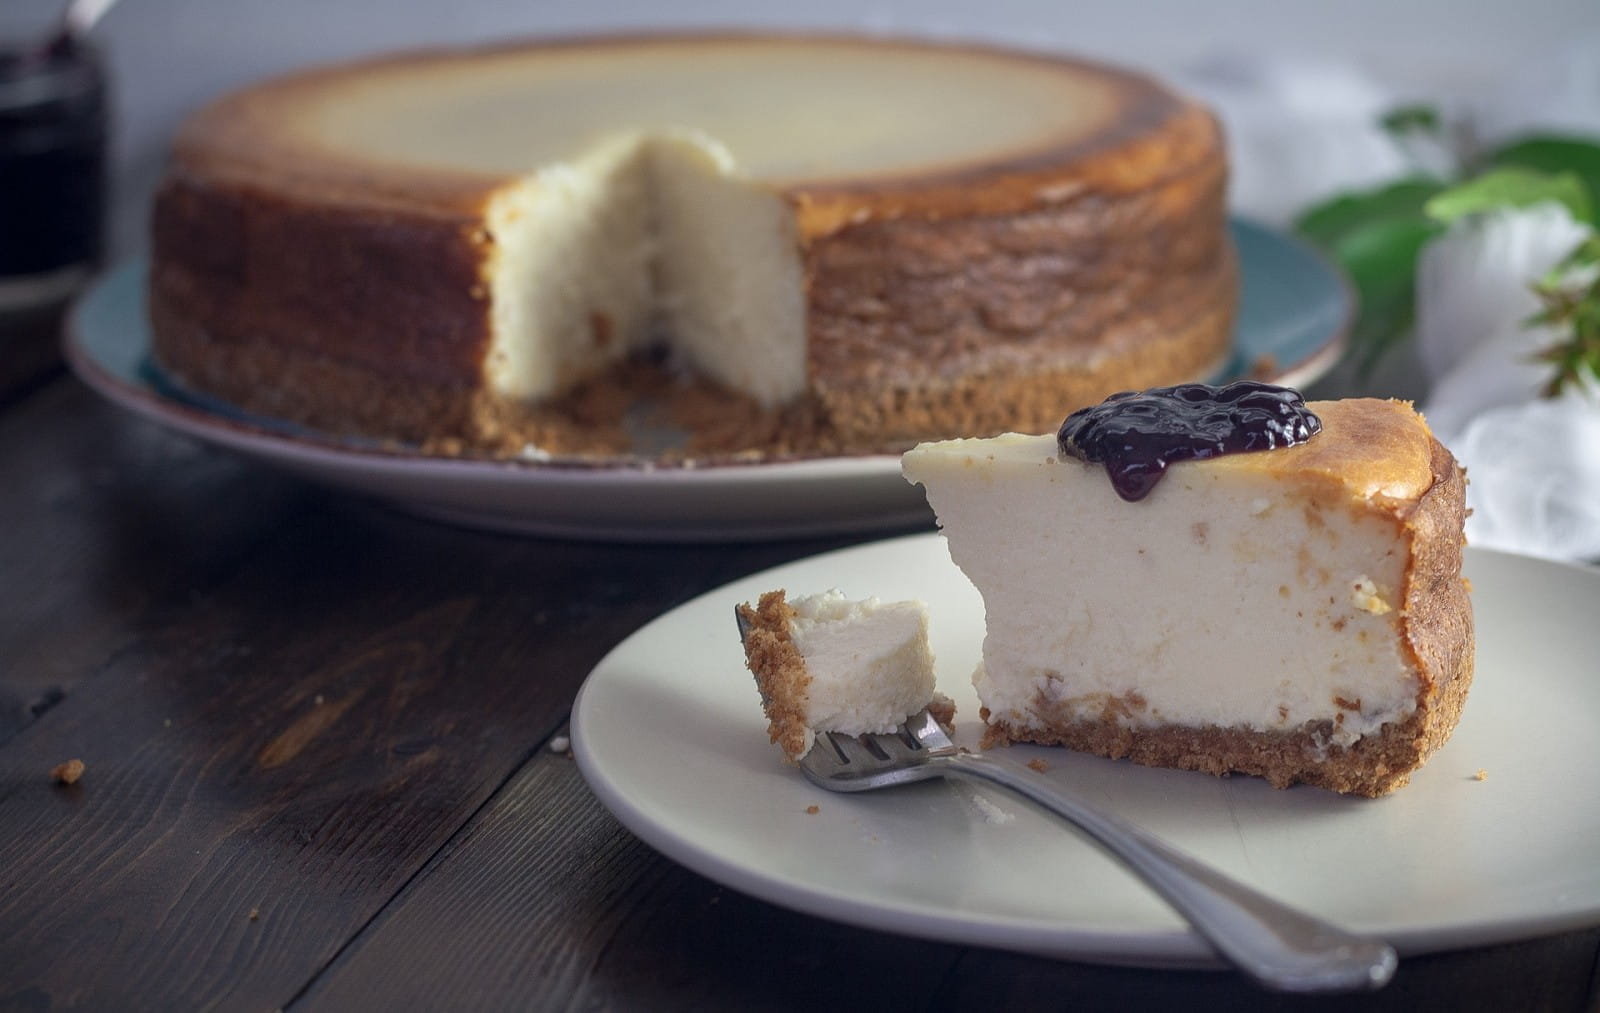 What wine - and other drinks - to pair with cheesecake